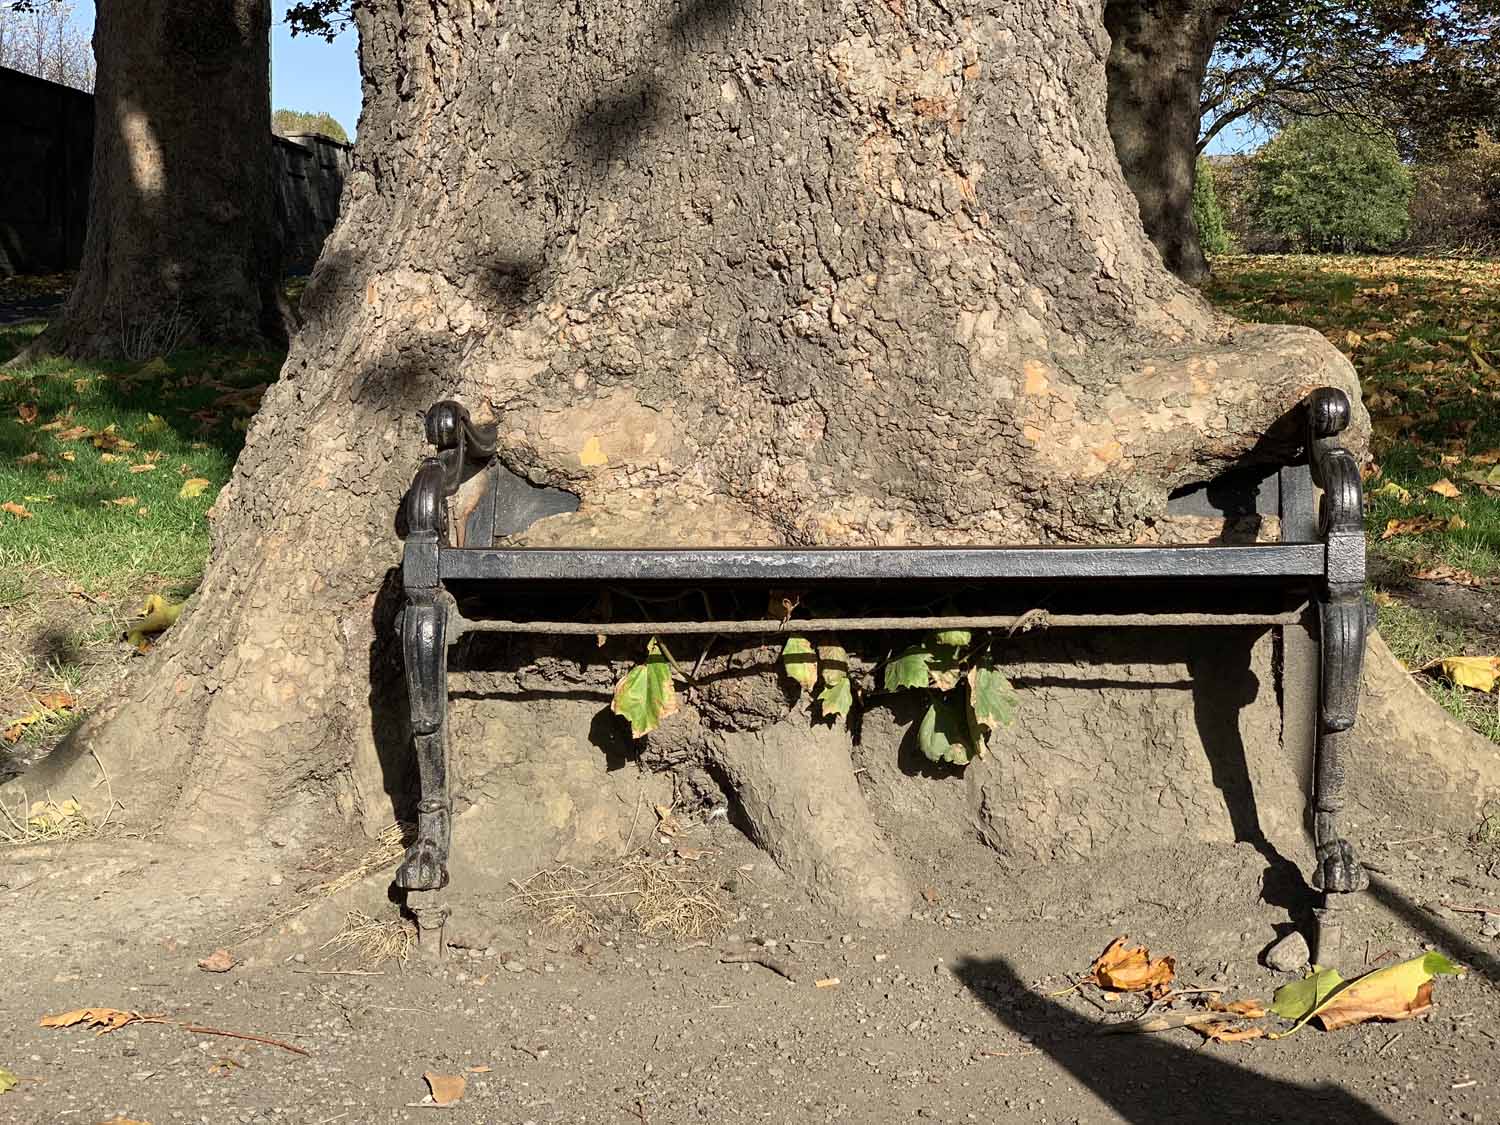 The Hungry Tree